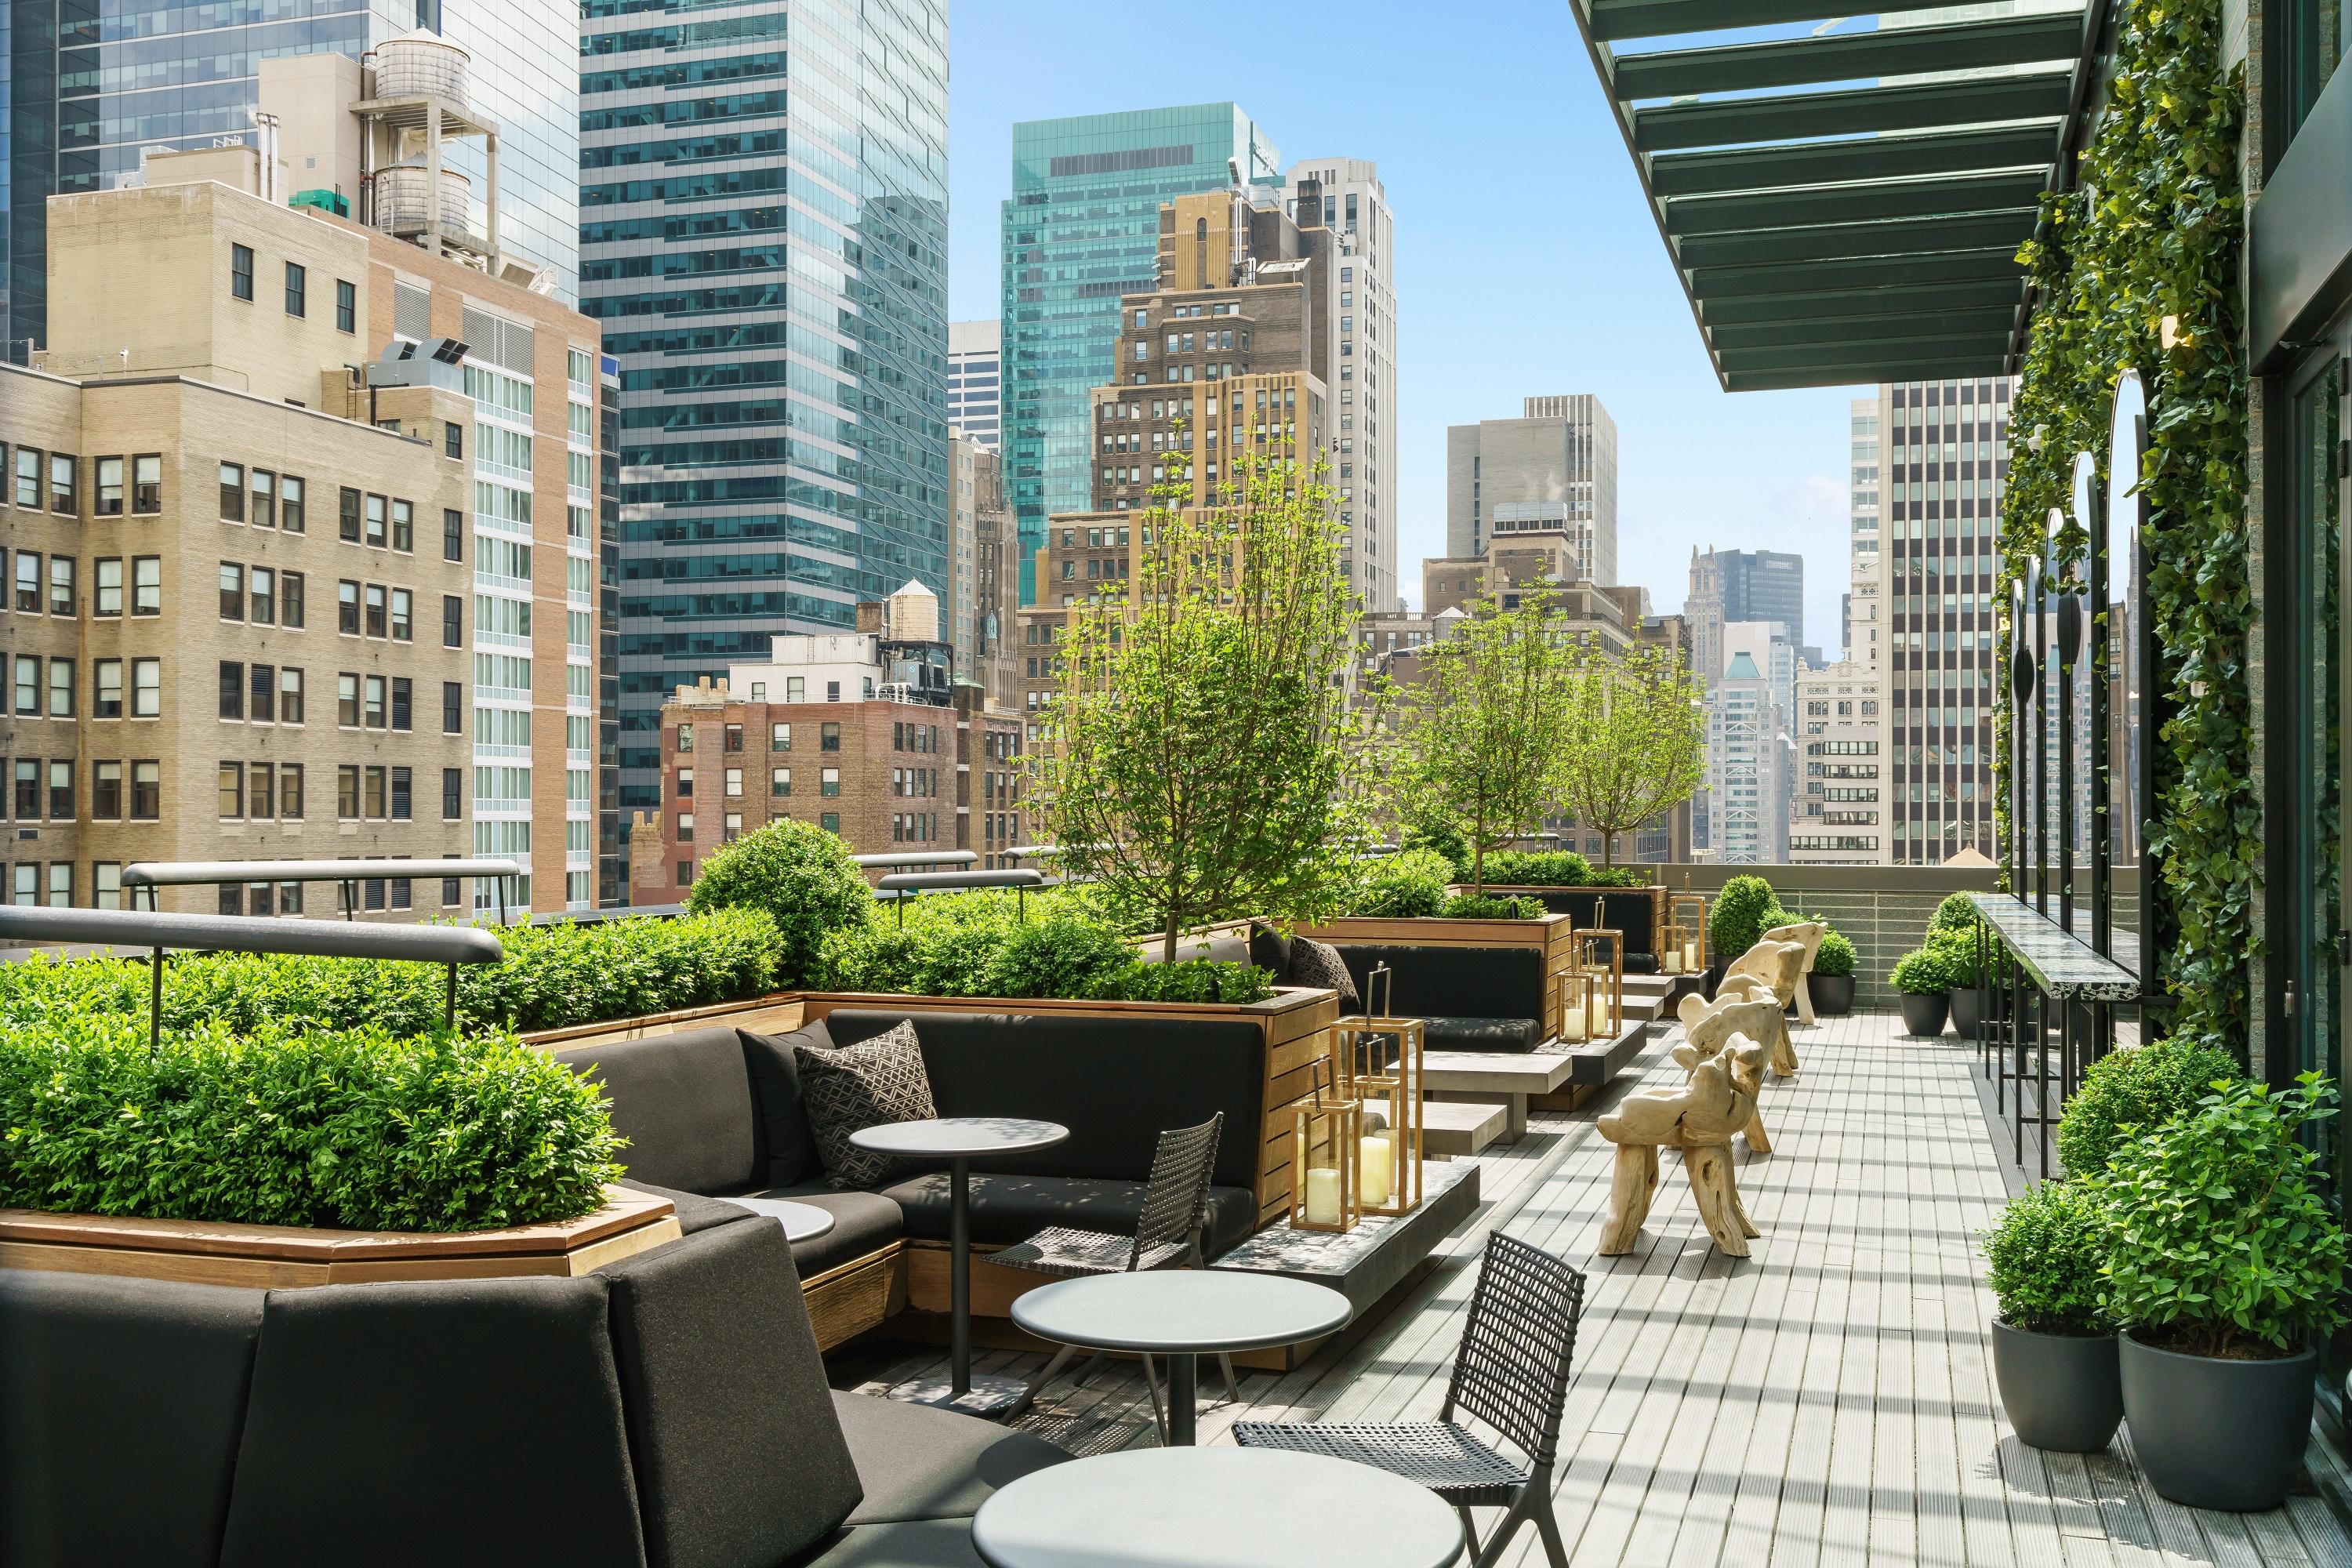 NYC Hotel Week Your Guide to NYC Tourism